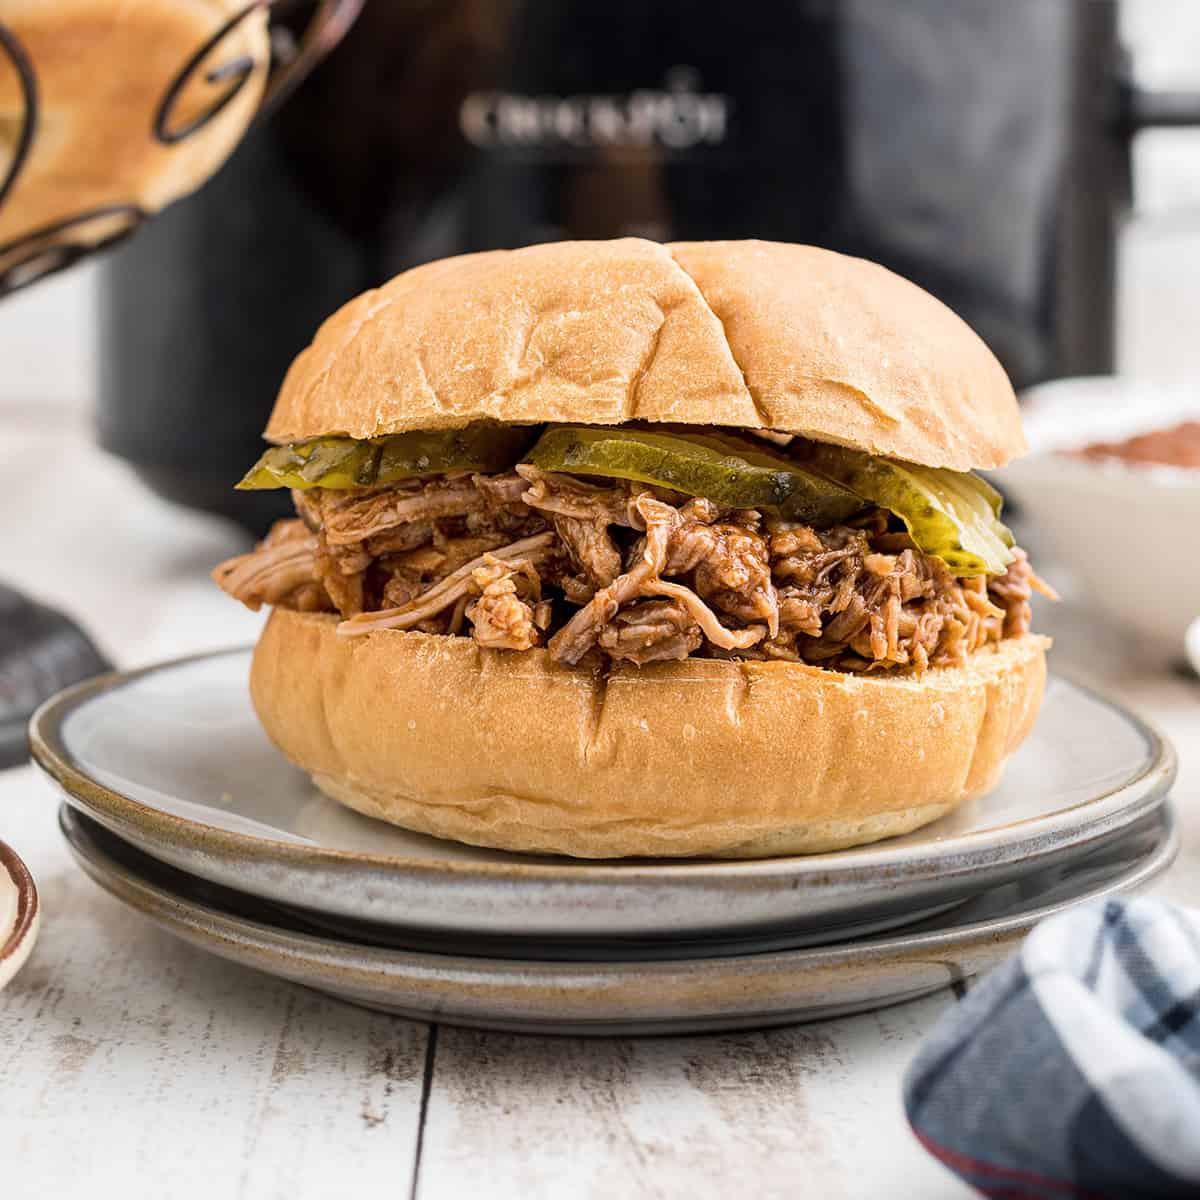 A pulled pork sandwich on a serving plate with a slow cooker in the background.